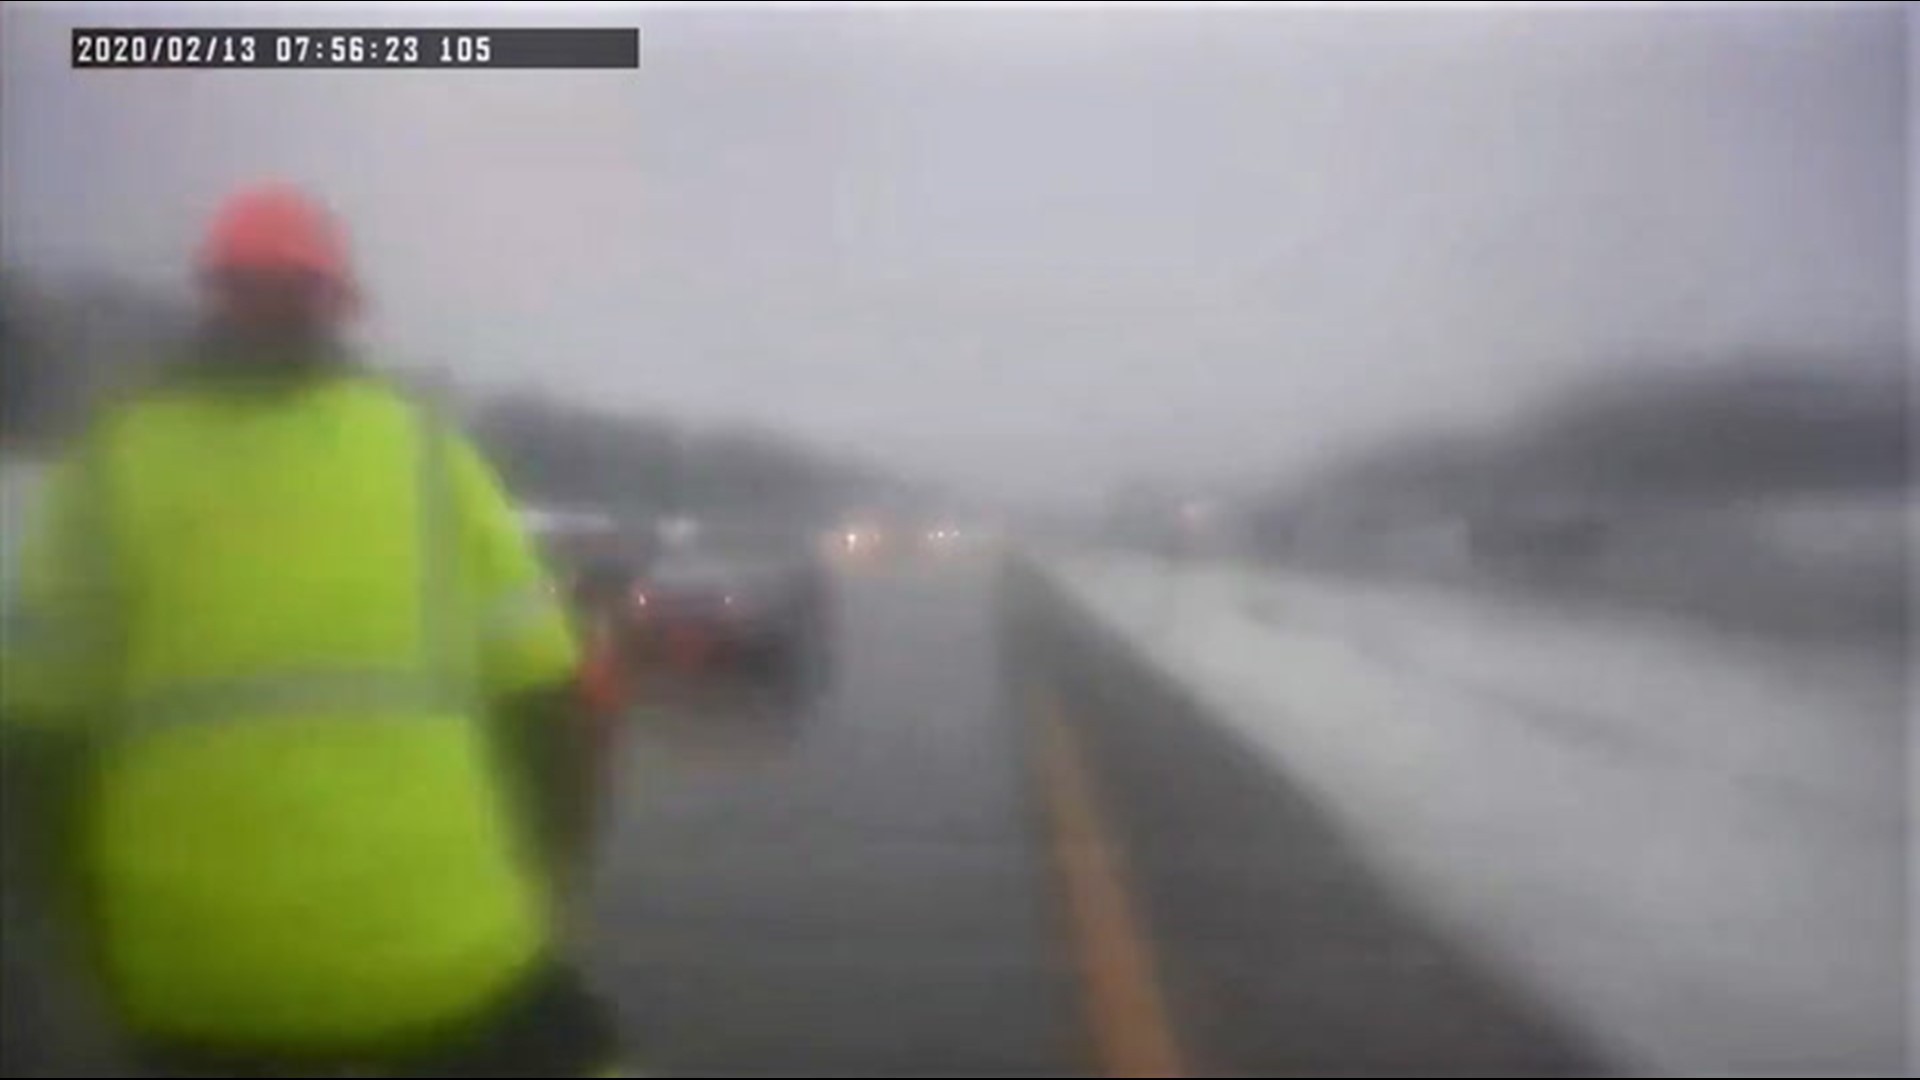 During a storm on Feb. 13, a DOT worker in the Capital District in New York was nearly hit by an oncoming car after stopping to help with a flat tire.